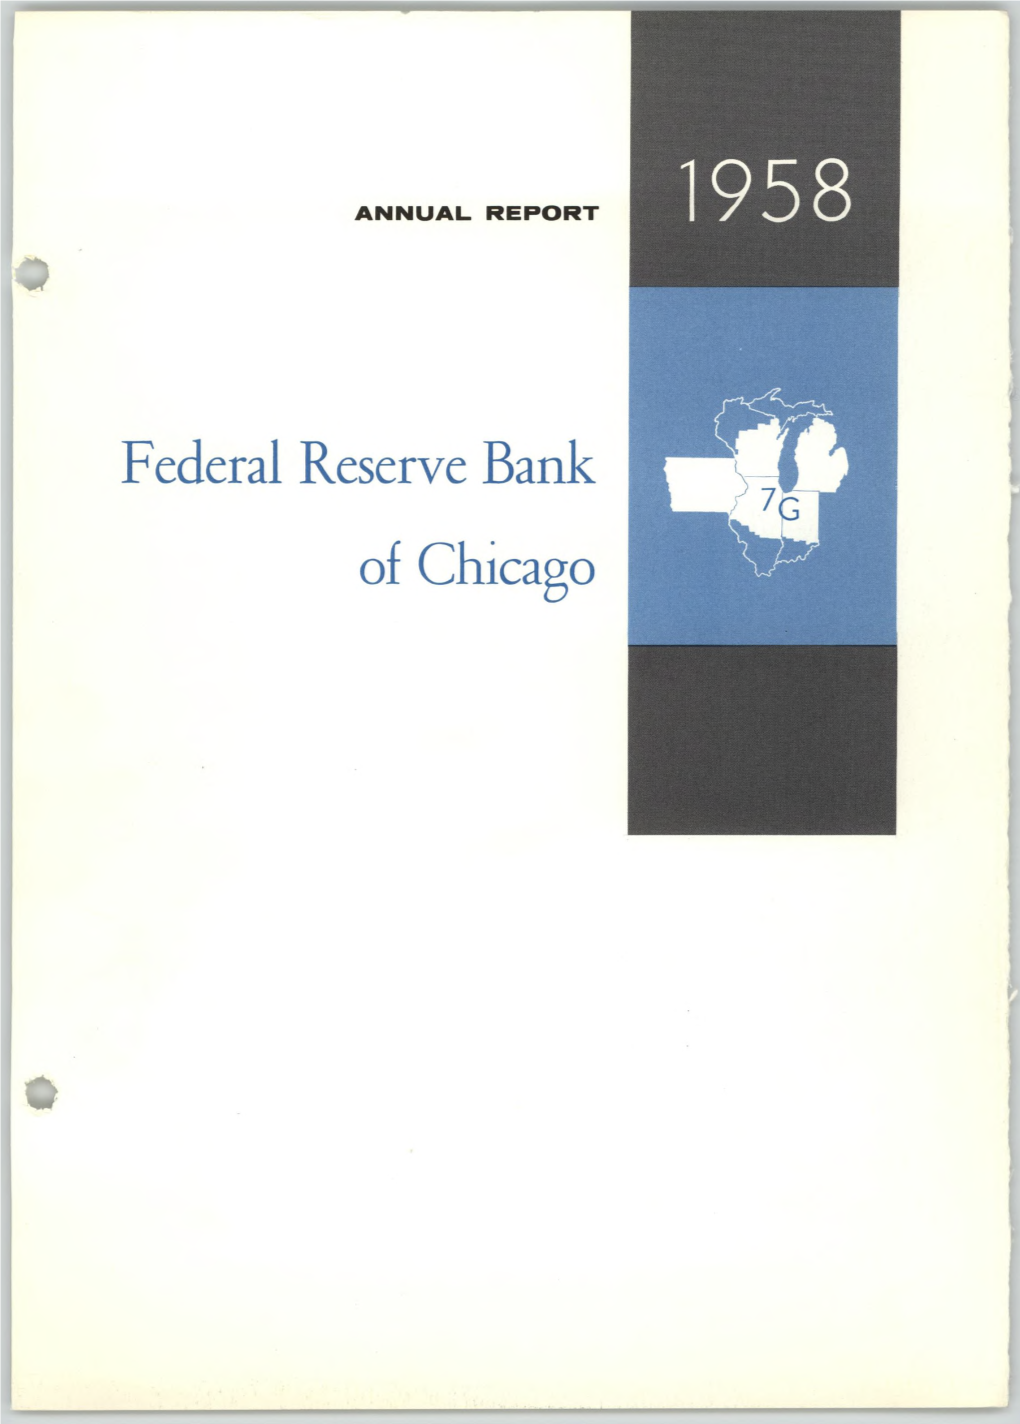 Annual Report of the Federal Reserve Bank of Chicago